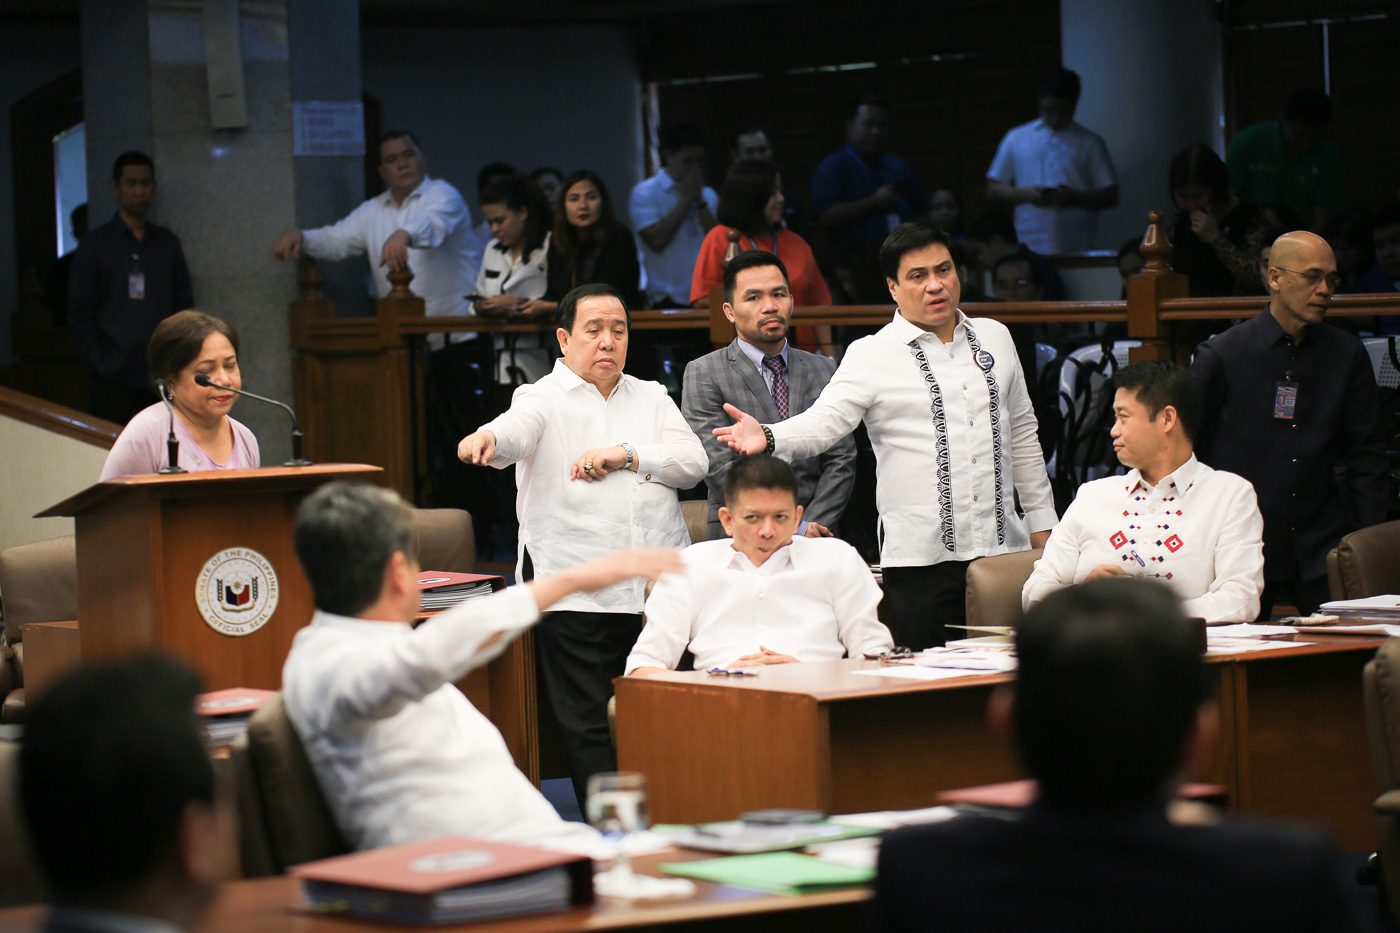 POLITICAL GESTURES. Philippine senators nearly came to blows over the supposed exclusion of 7 administration senators from the resolution against the killings of minors during a session on September 27, 2017. Photo by Joseph Vidal  